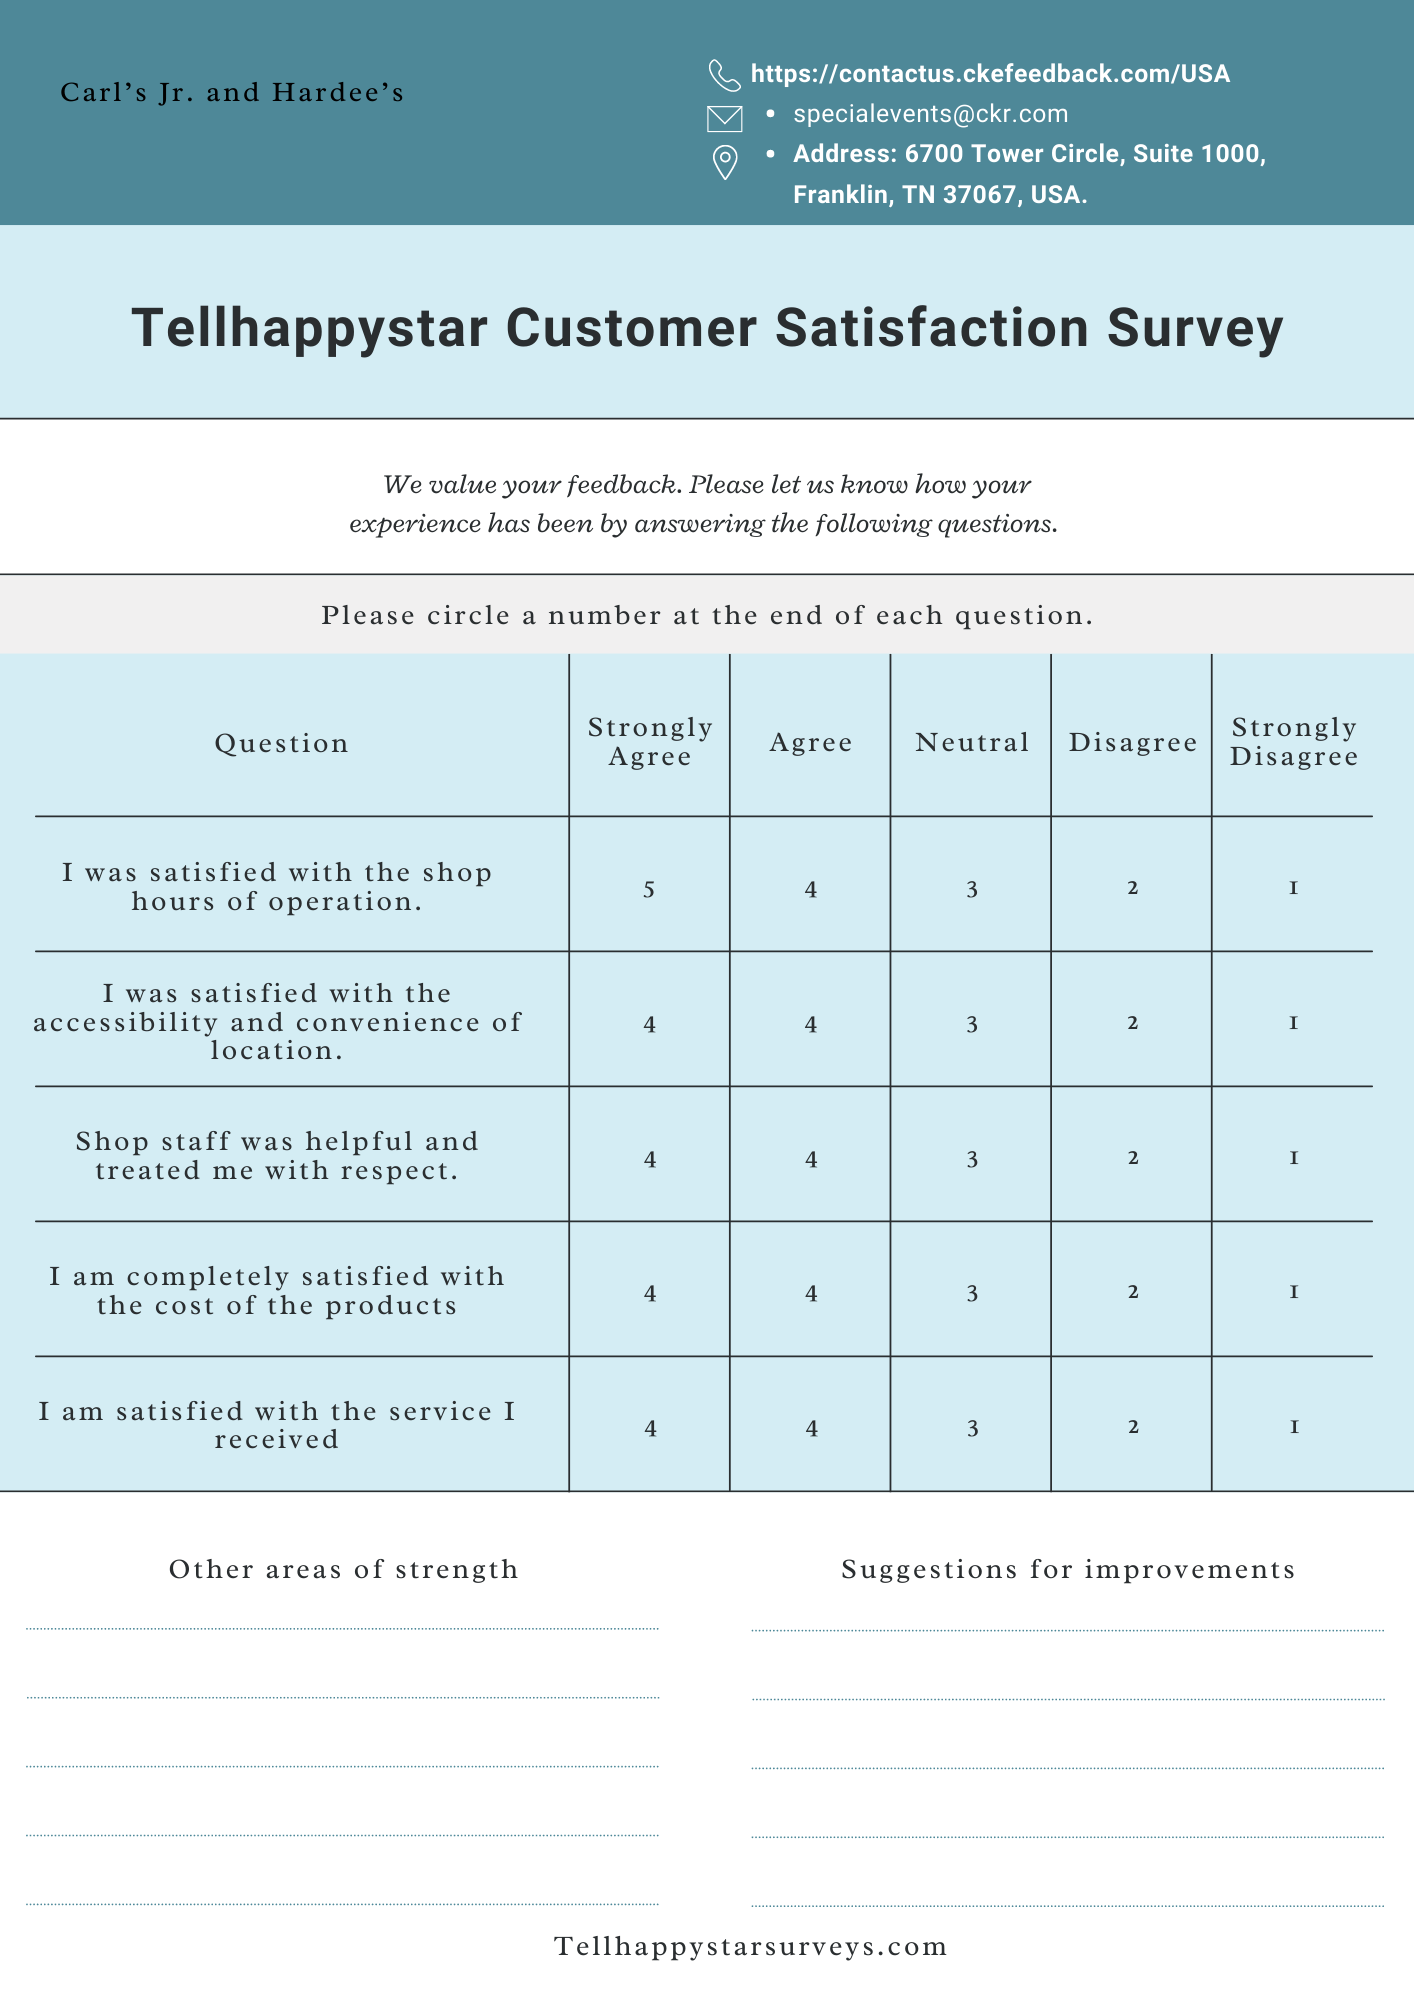 Welcome to Tellhappystar customer satisfcation survey